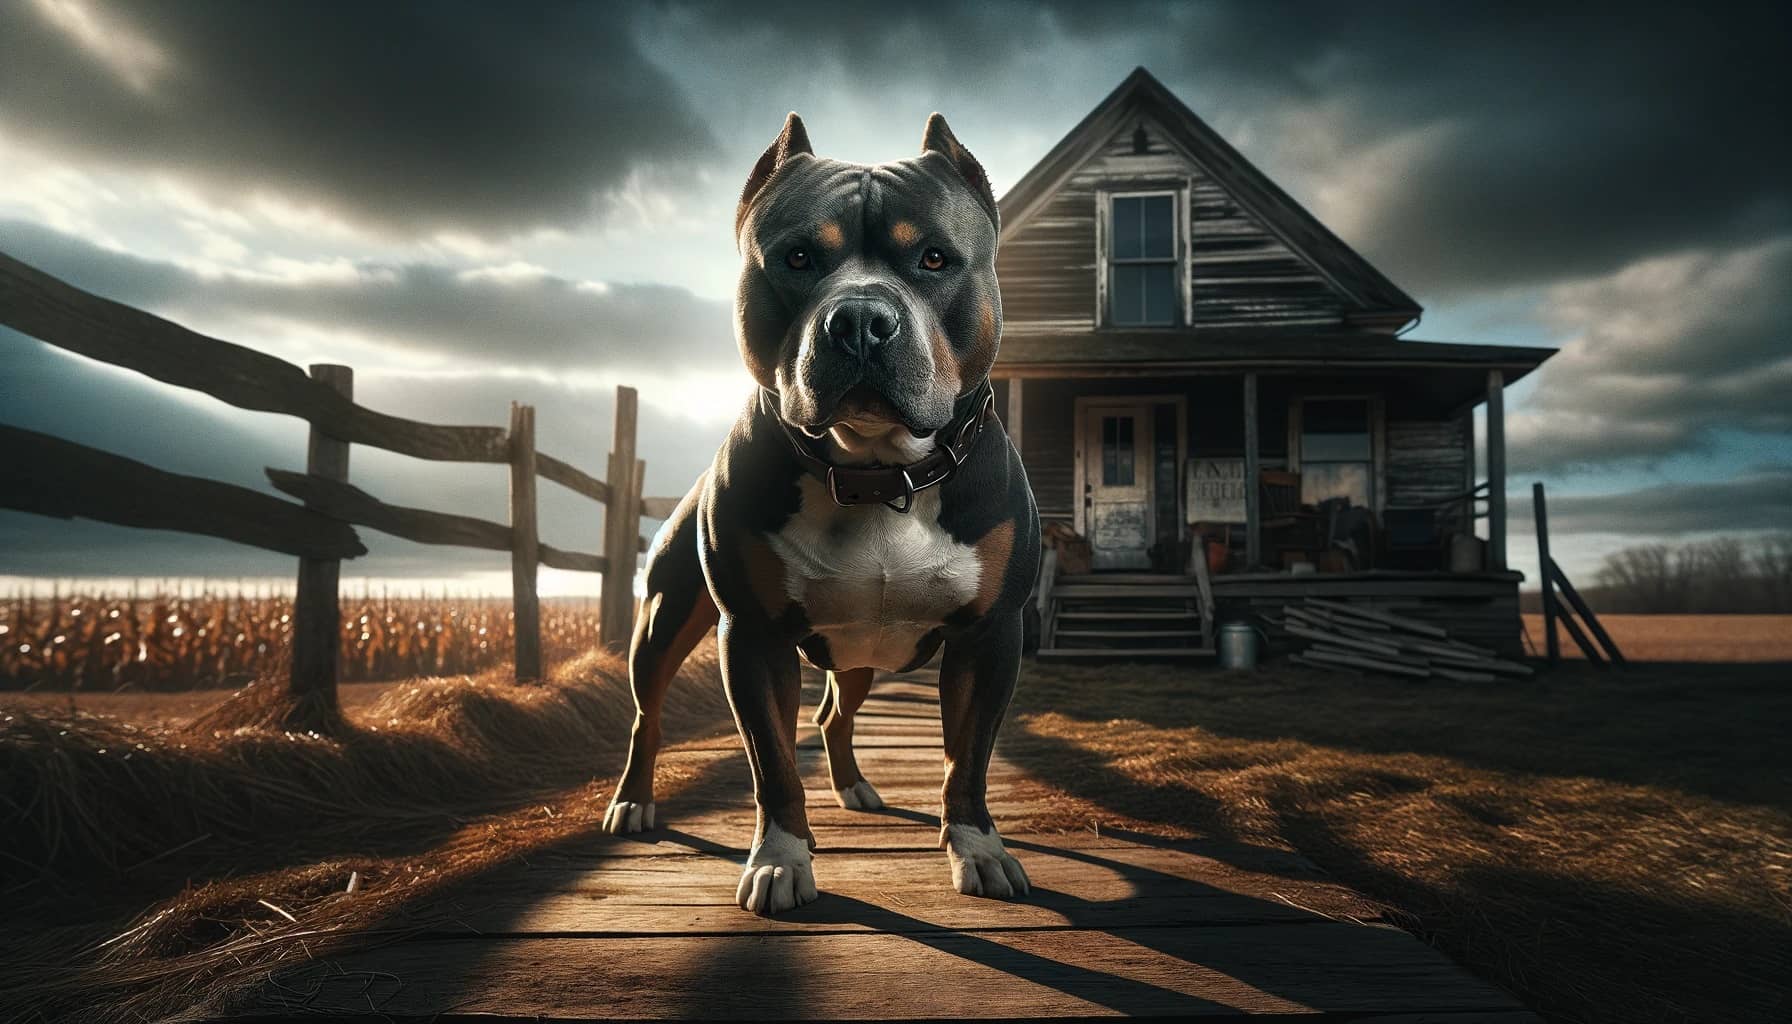 American Pit Bull Terrier standing alert in front of a rustic, American farmhouse, set against the backdrop of dramatic, late afternoon lighting